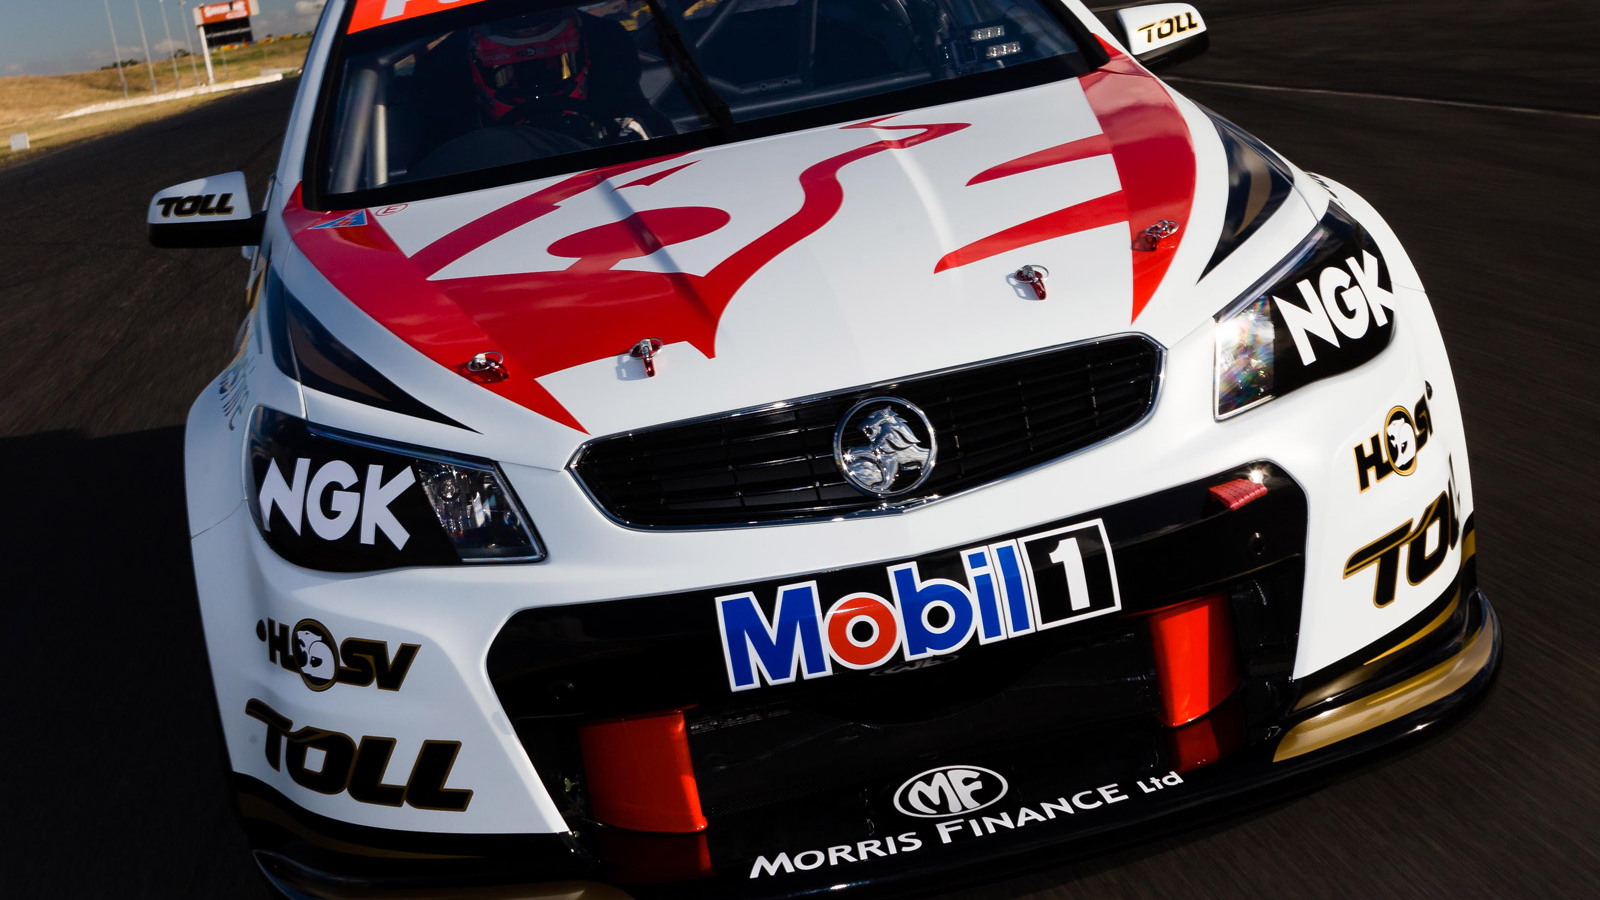 2013 Holden Commodore V8 Supercars race car